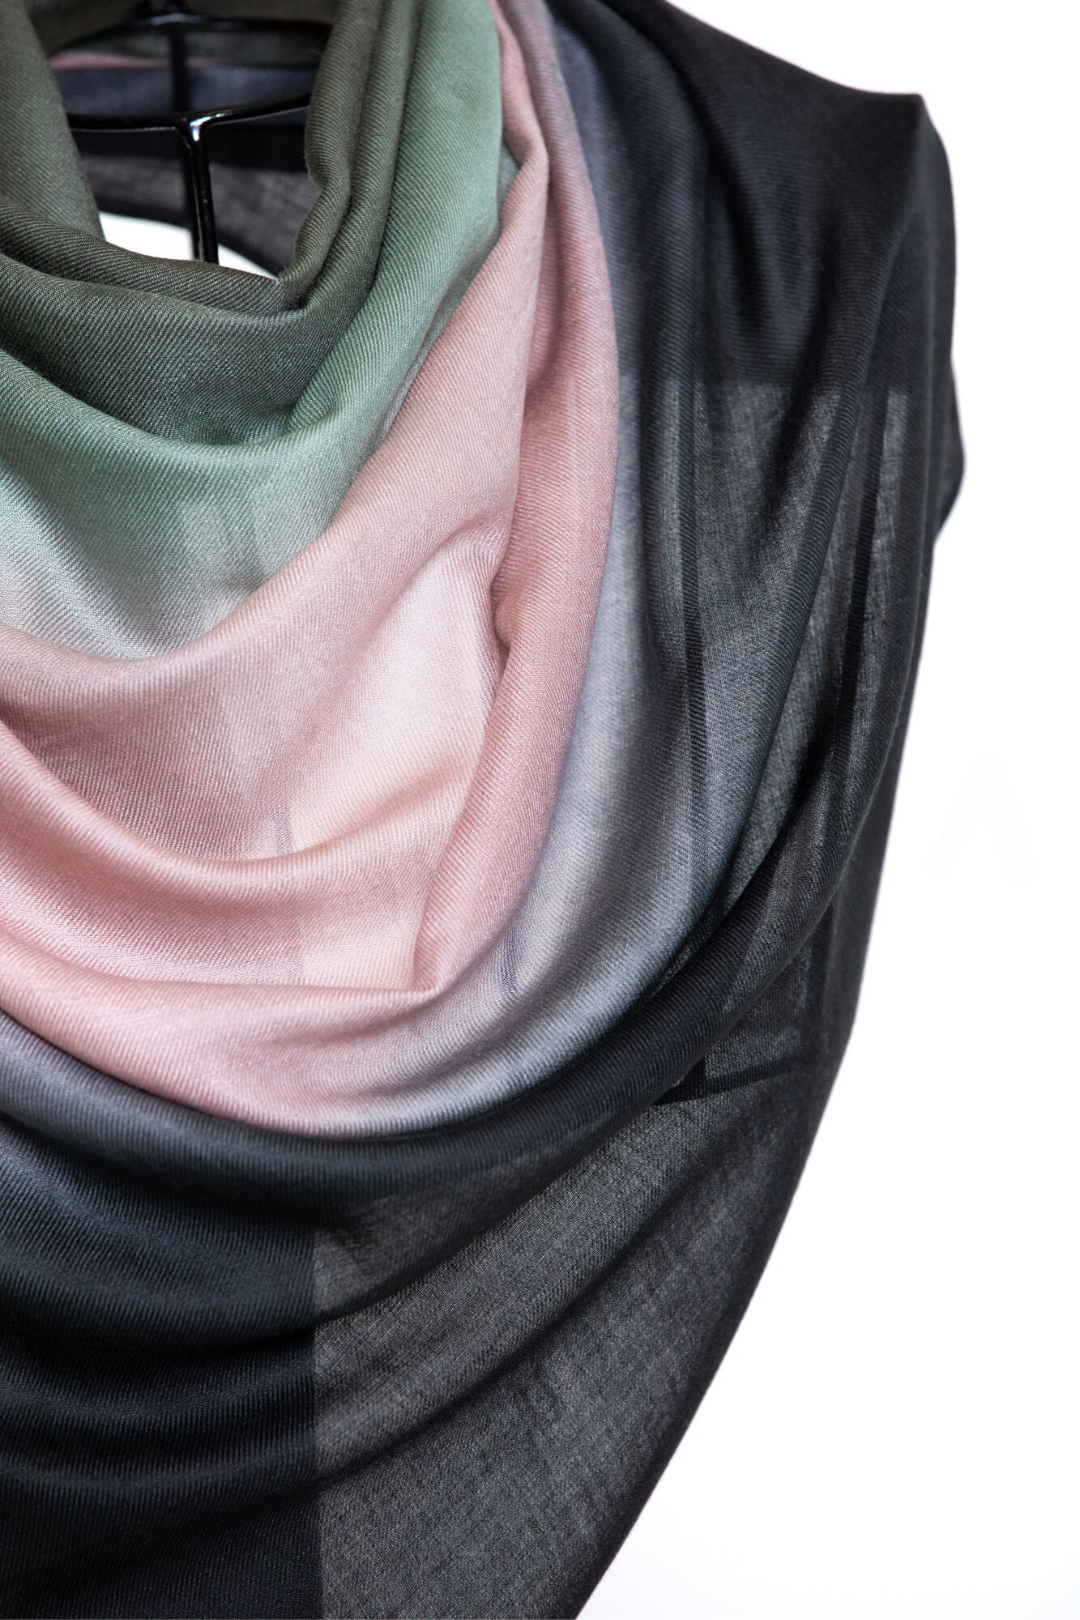 Ombre Three Colors Printed Mo-shmere Shawls - Black Pink Sage